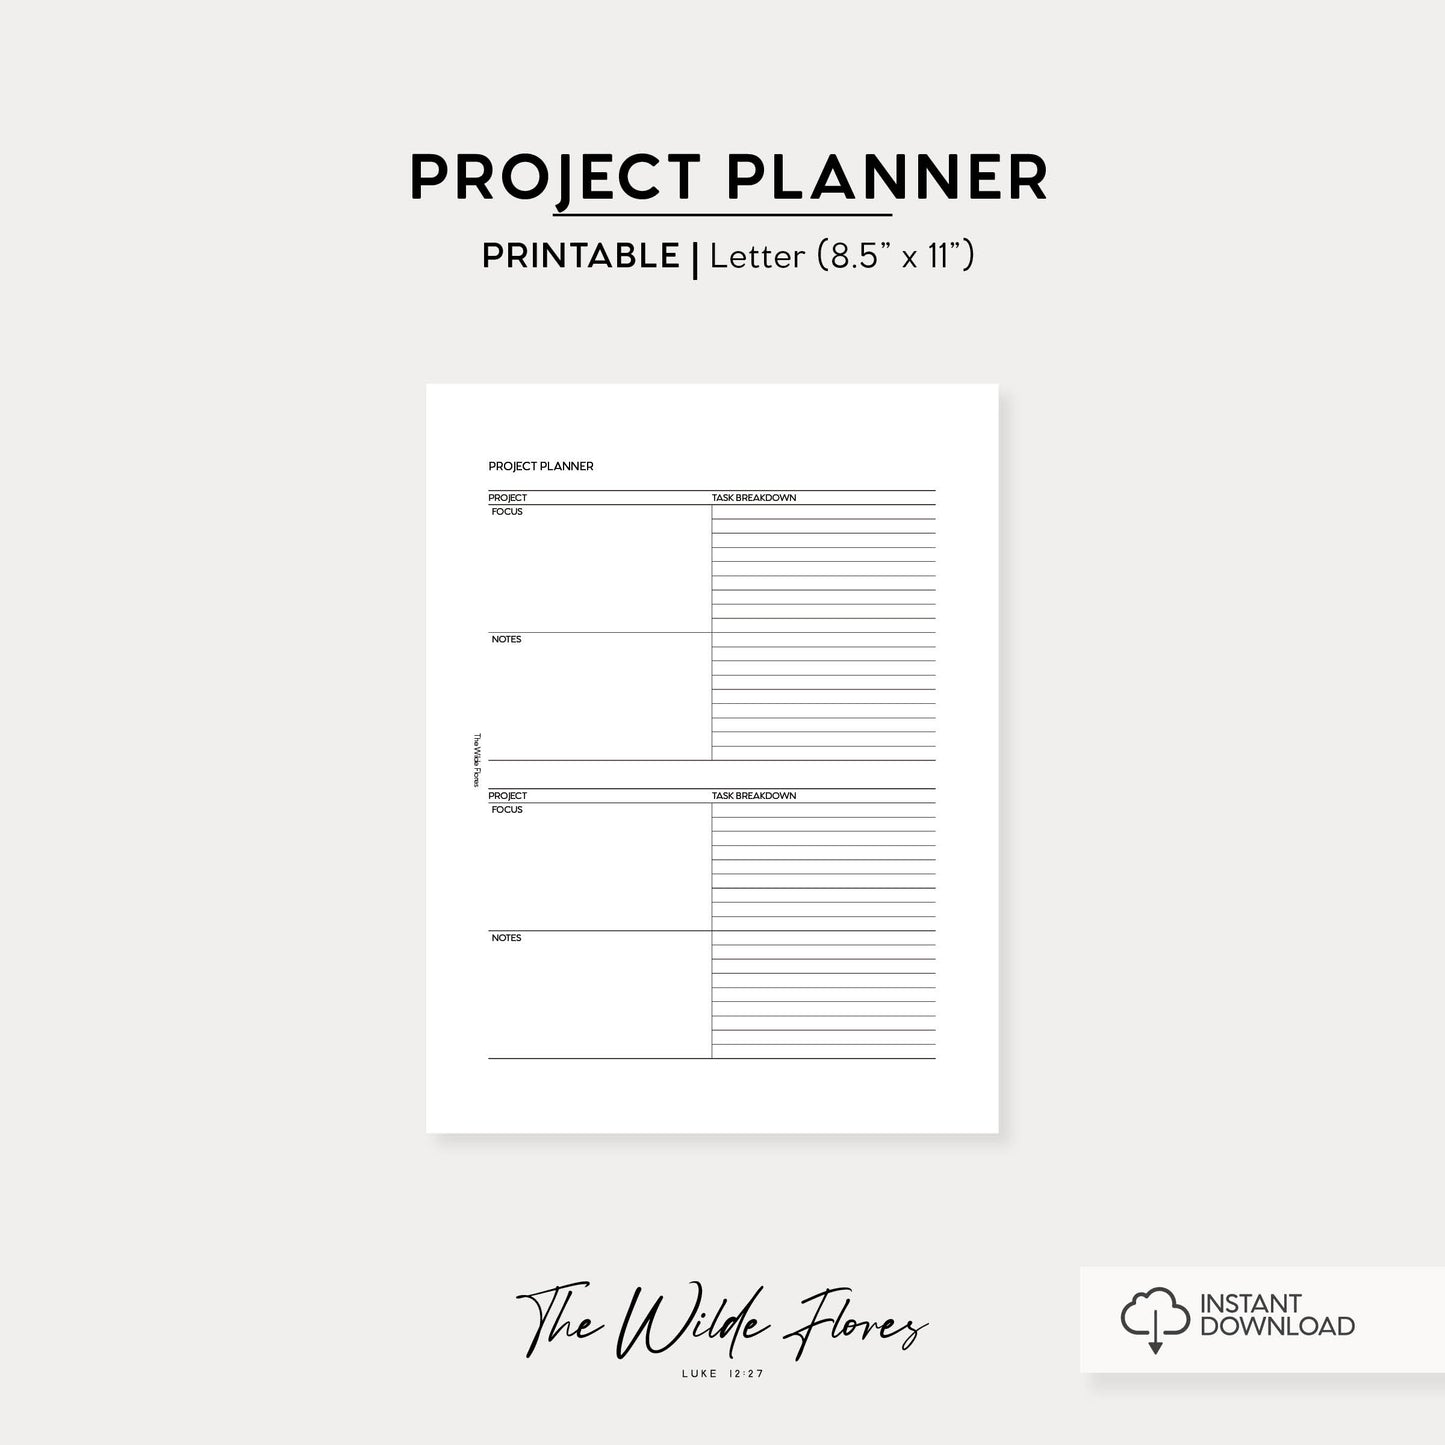 Project Planner: Letter Size Printable